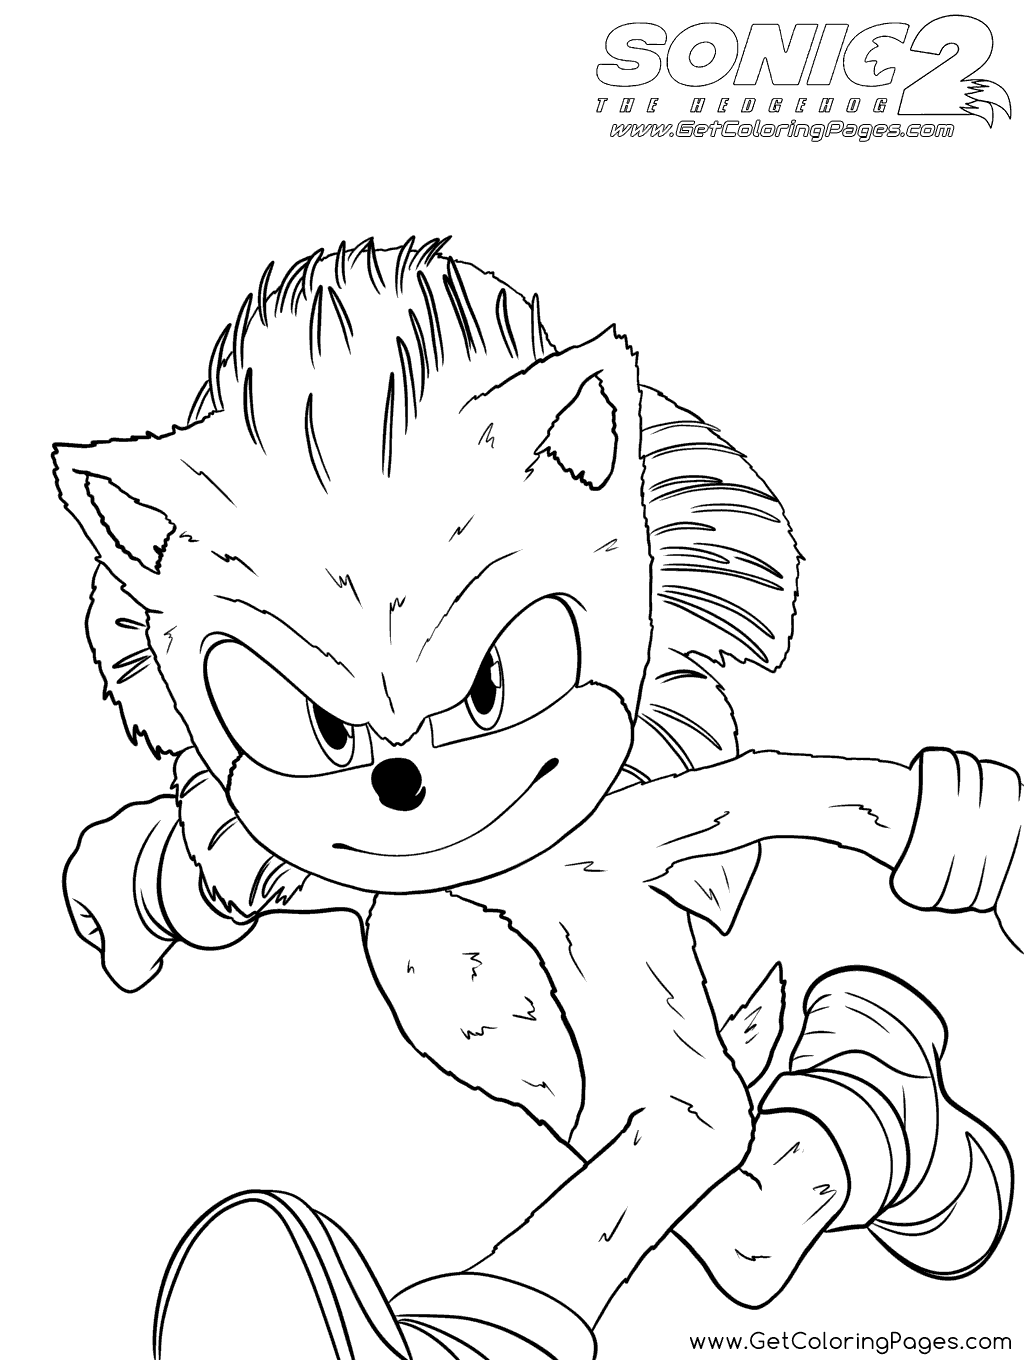 Sonic In Sonic The Hedgehog 2 Coloring Page - Free Printable Coloring Pages